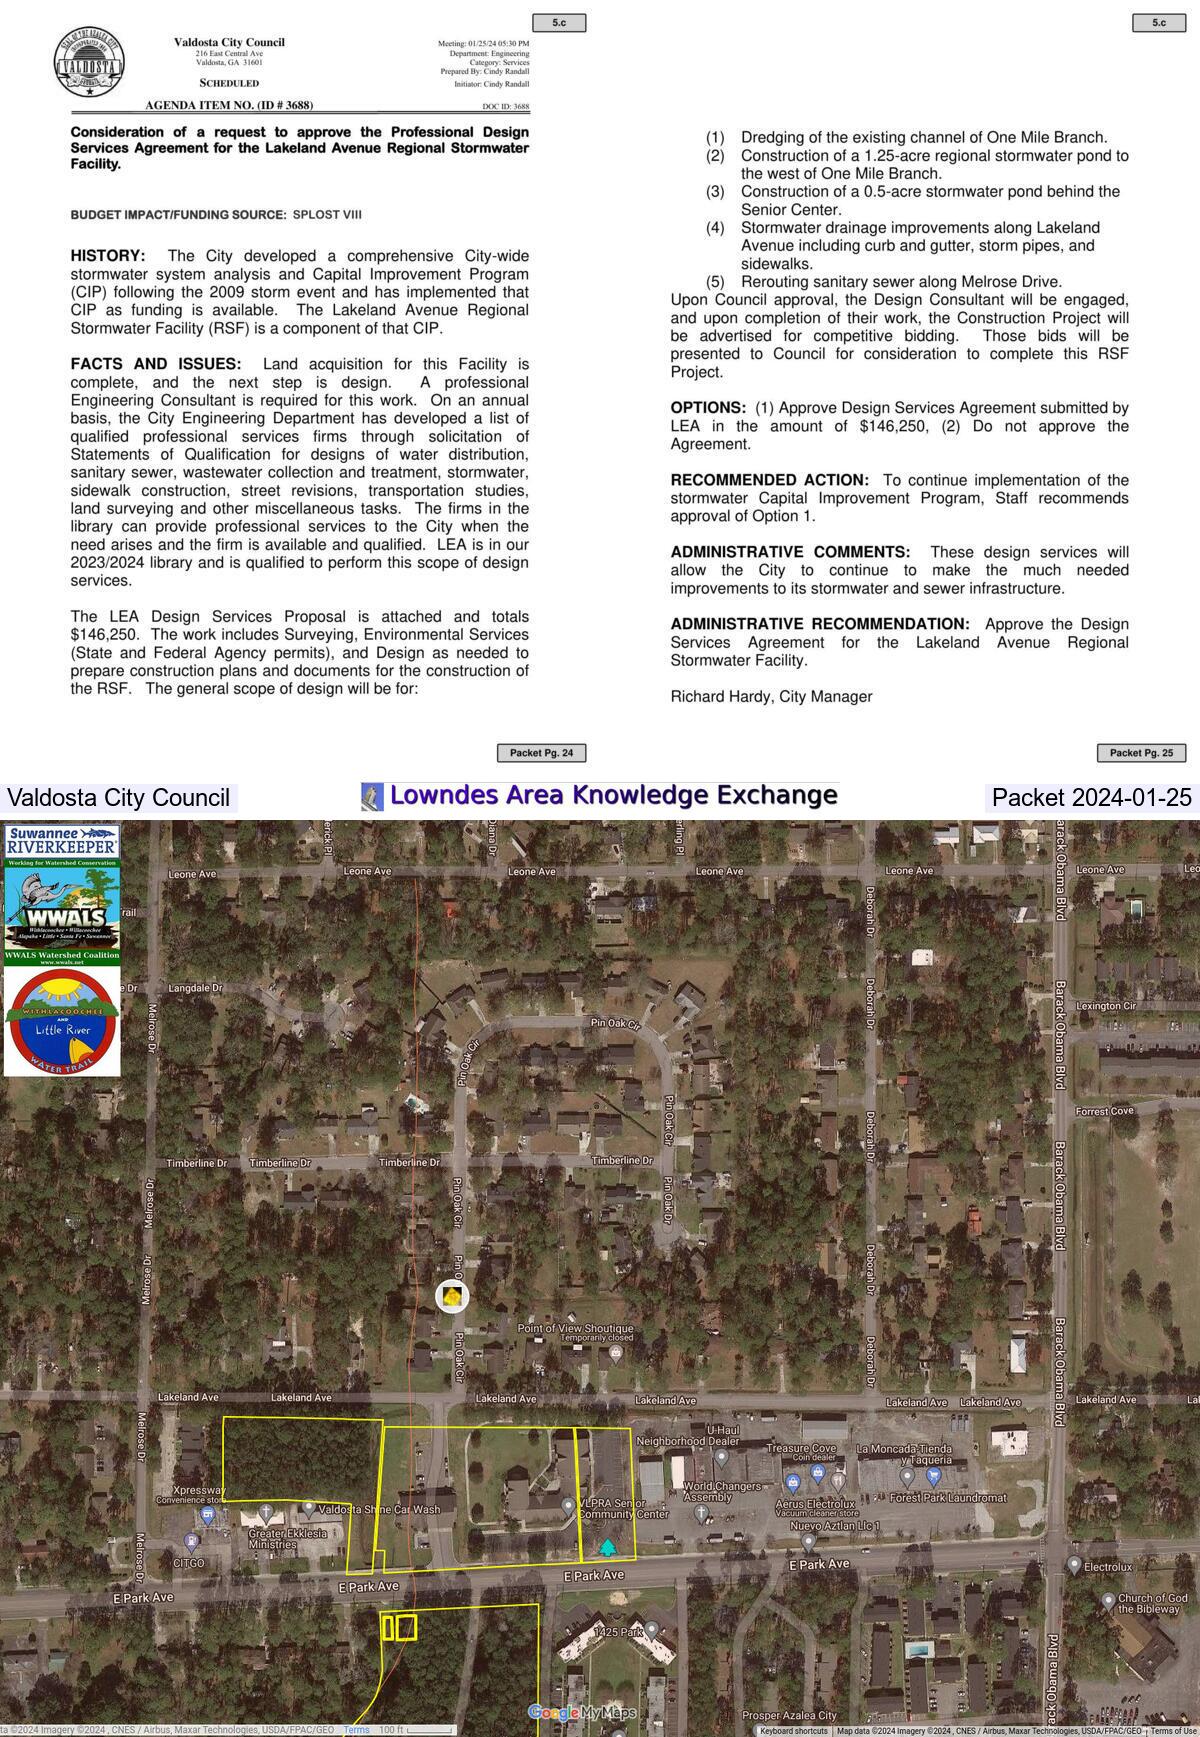 [Collage, Valdosta City Council Packet 2024-01-25]